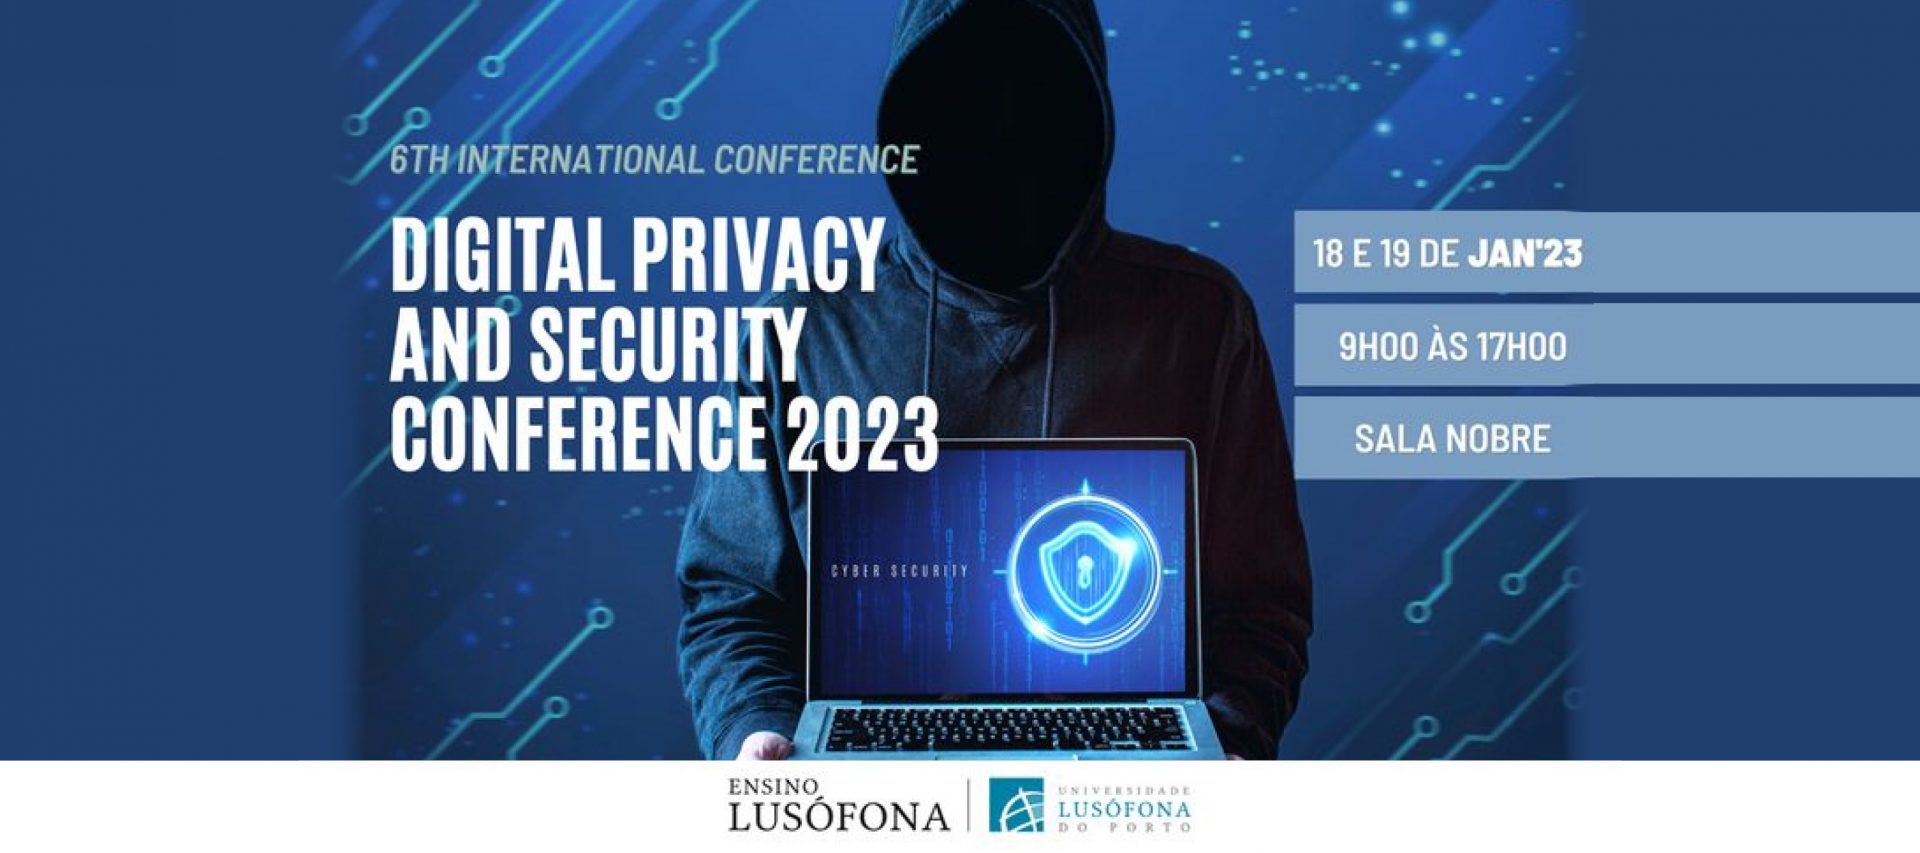 OERN parceira da Digital Privacy and Security Conference 2023